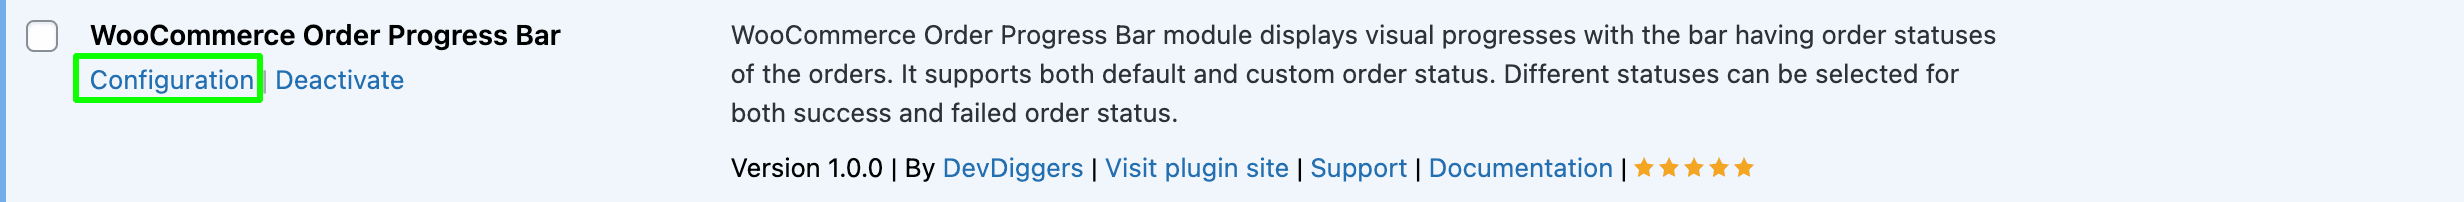 Configuration click from plugins page